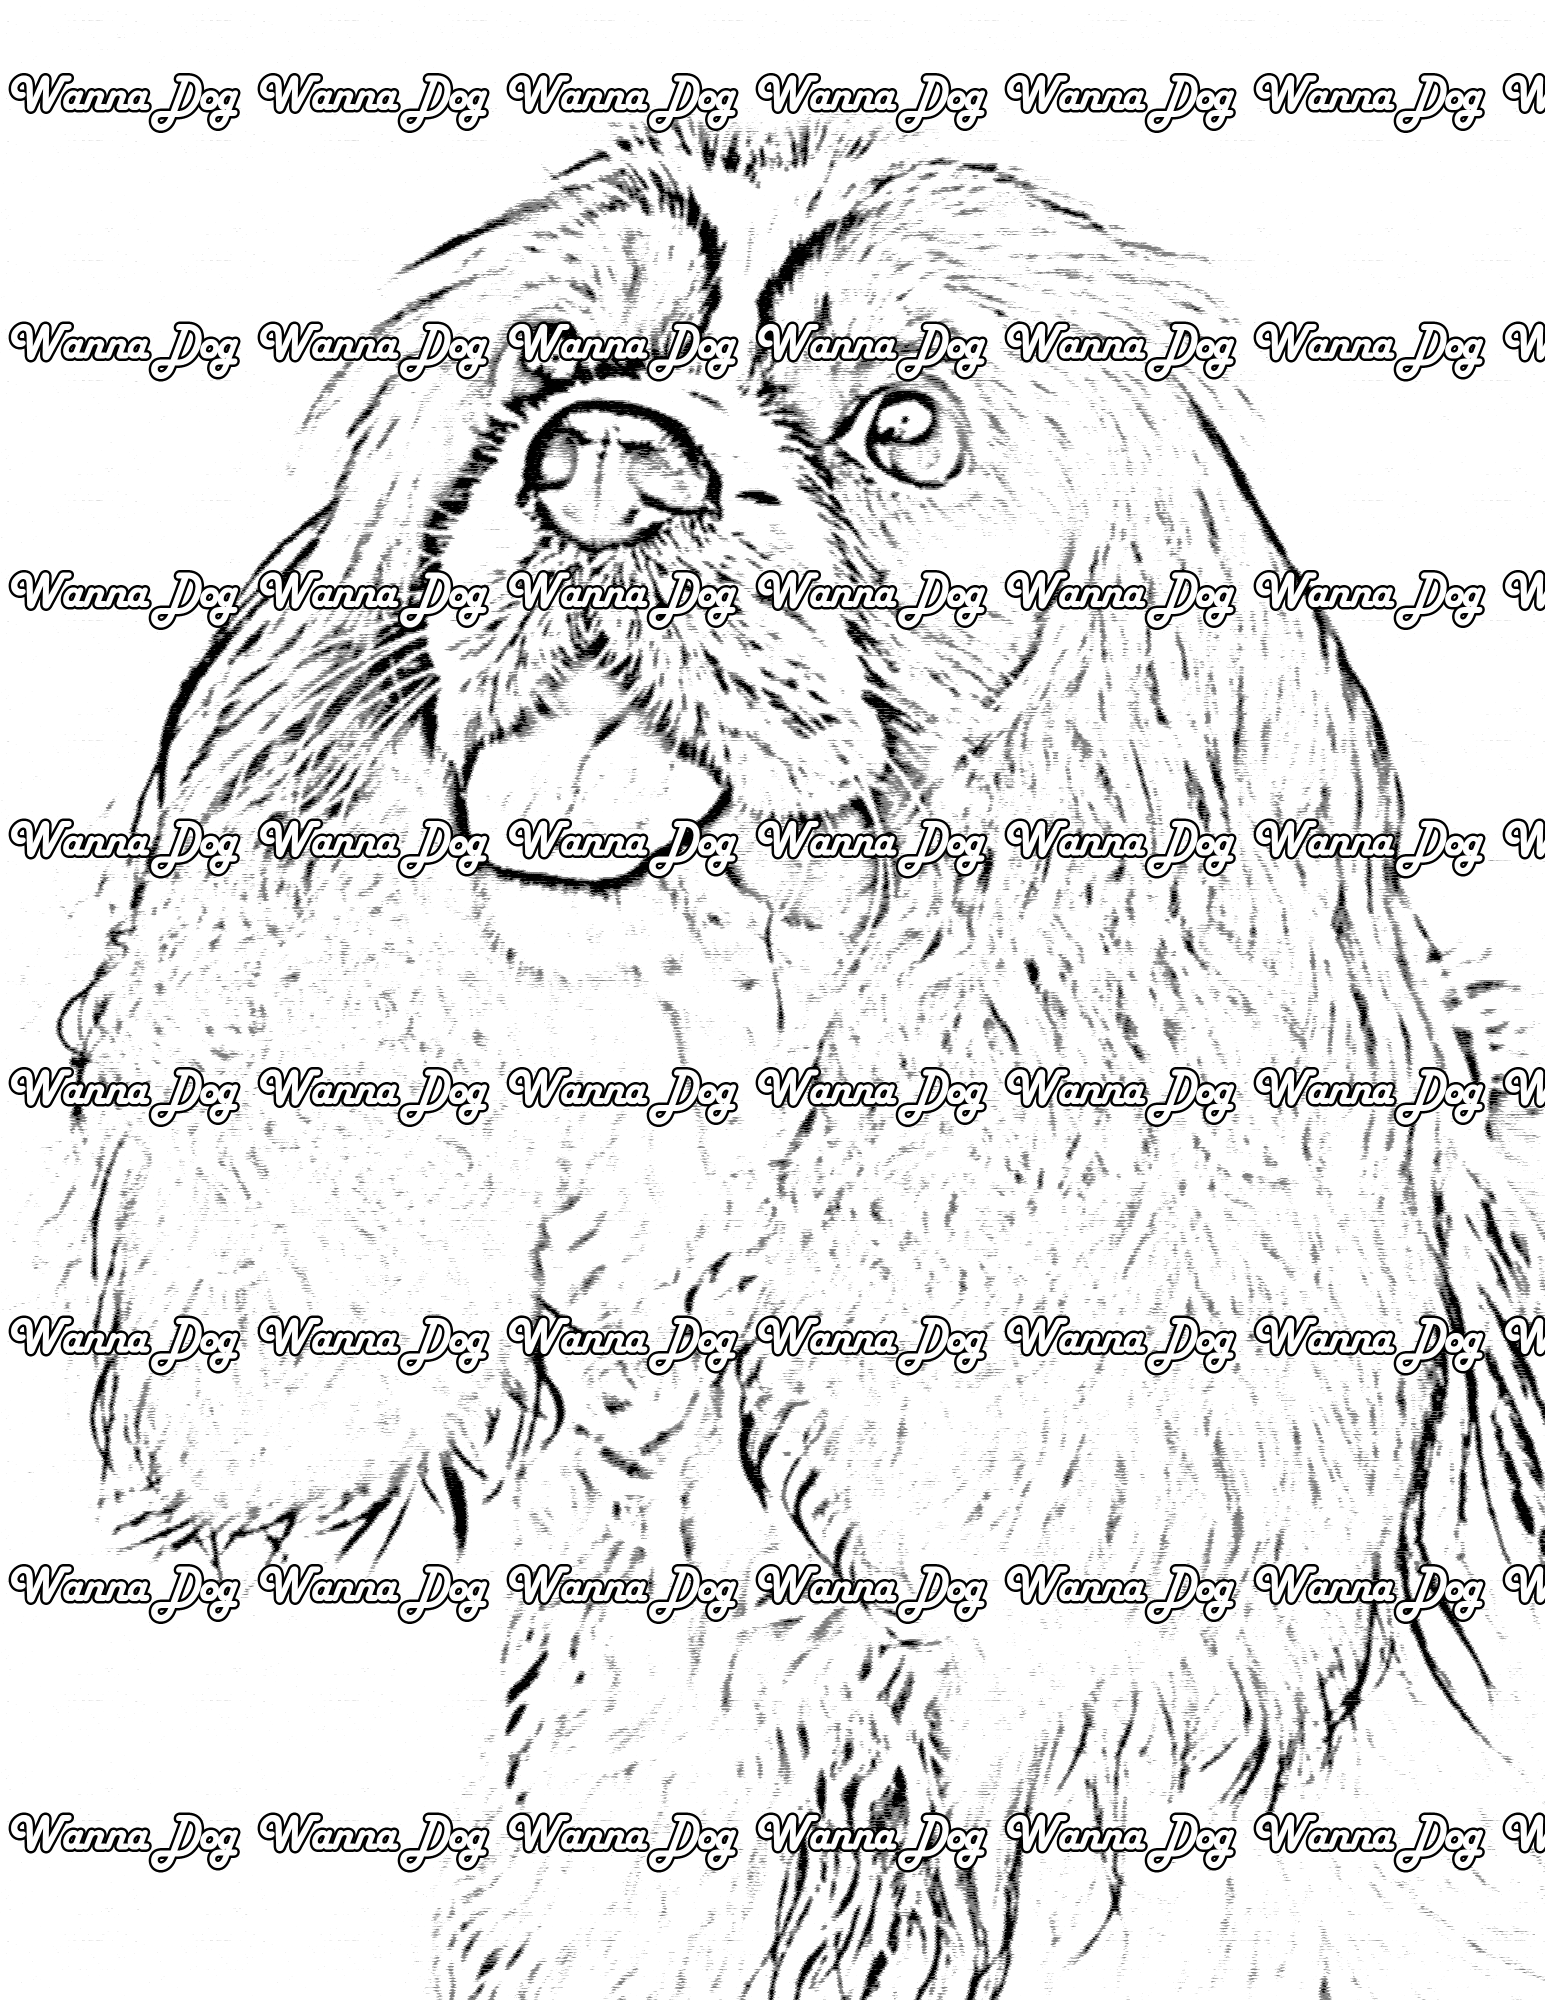 Cavalier King Charles Spaniel Coloring Page of a Cavalier King Charles Spaniel with their tongue out